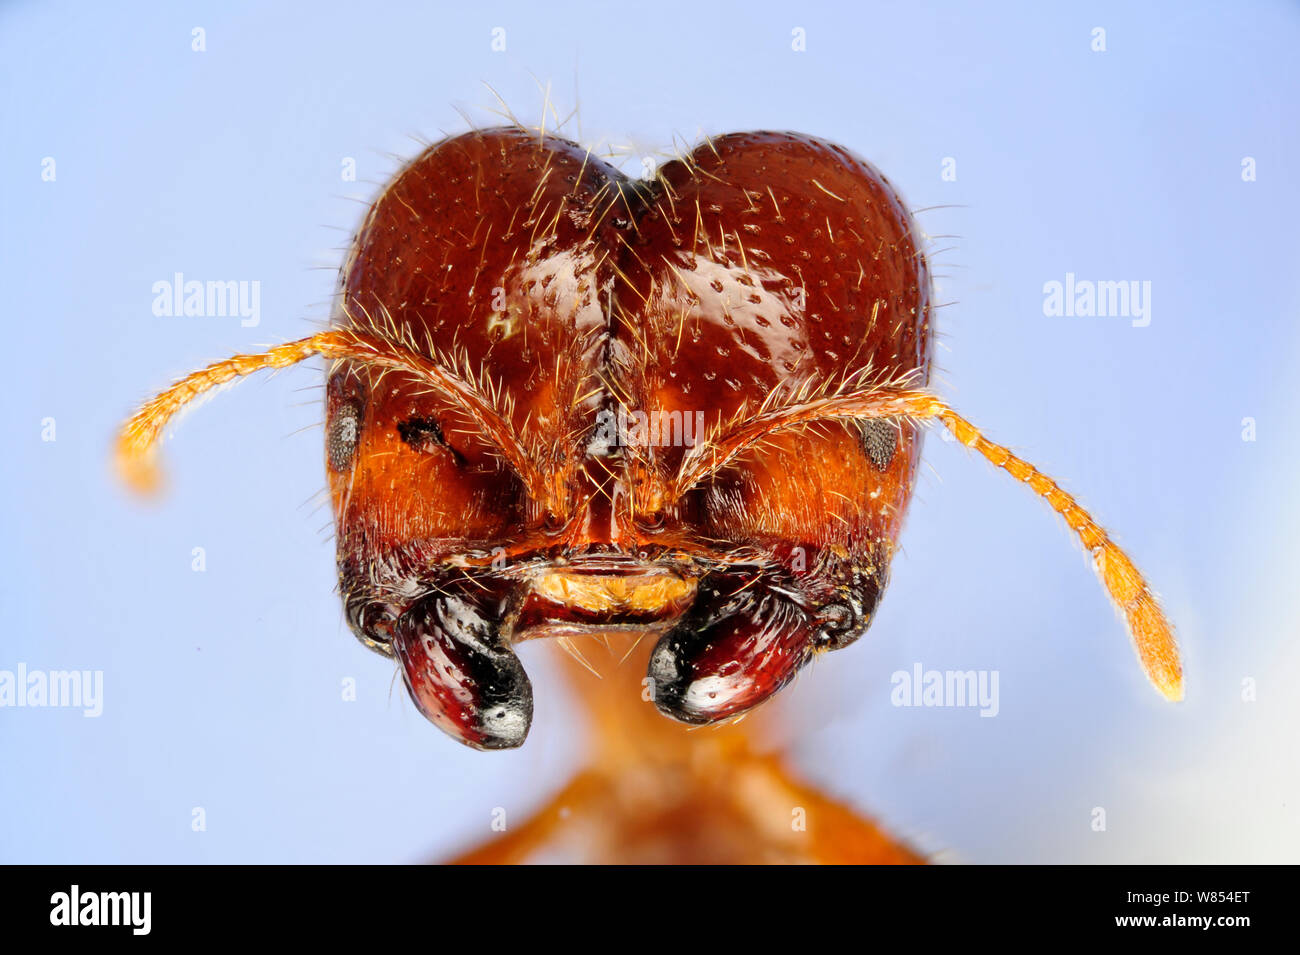 Fire Ant (Solenopsis geminata) head of a major worker with mandibles used for opening seeds.  Specimen photographed using digital focus stacking Stock Photo